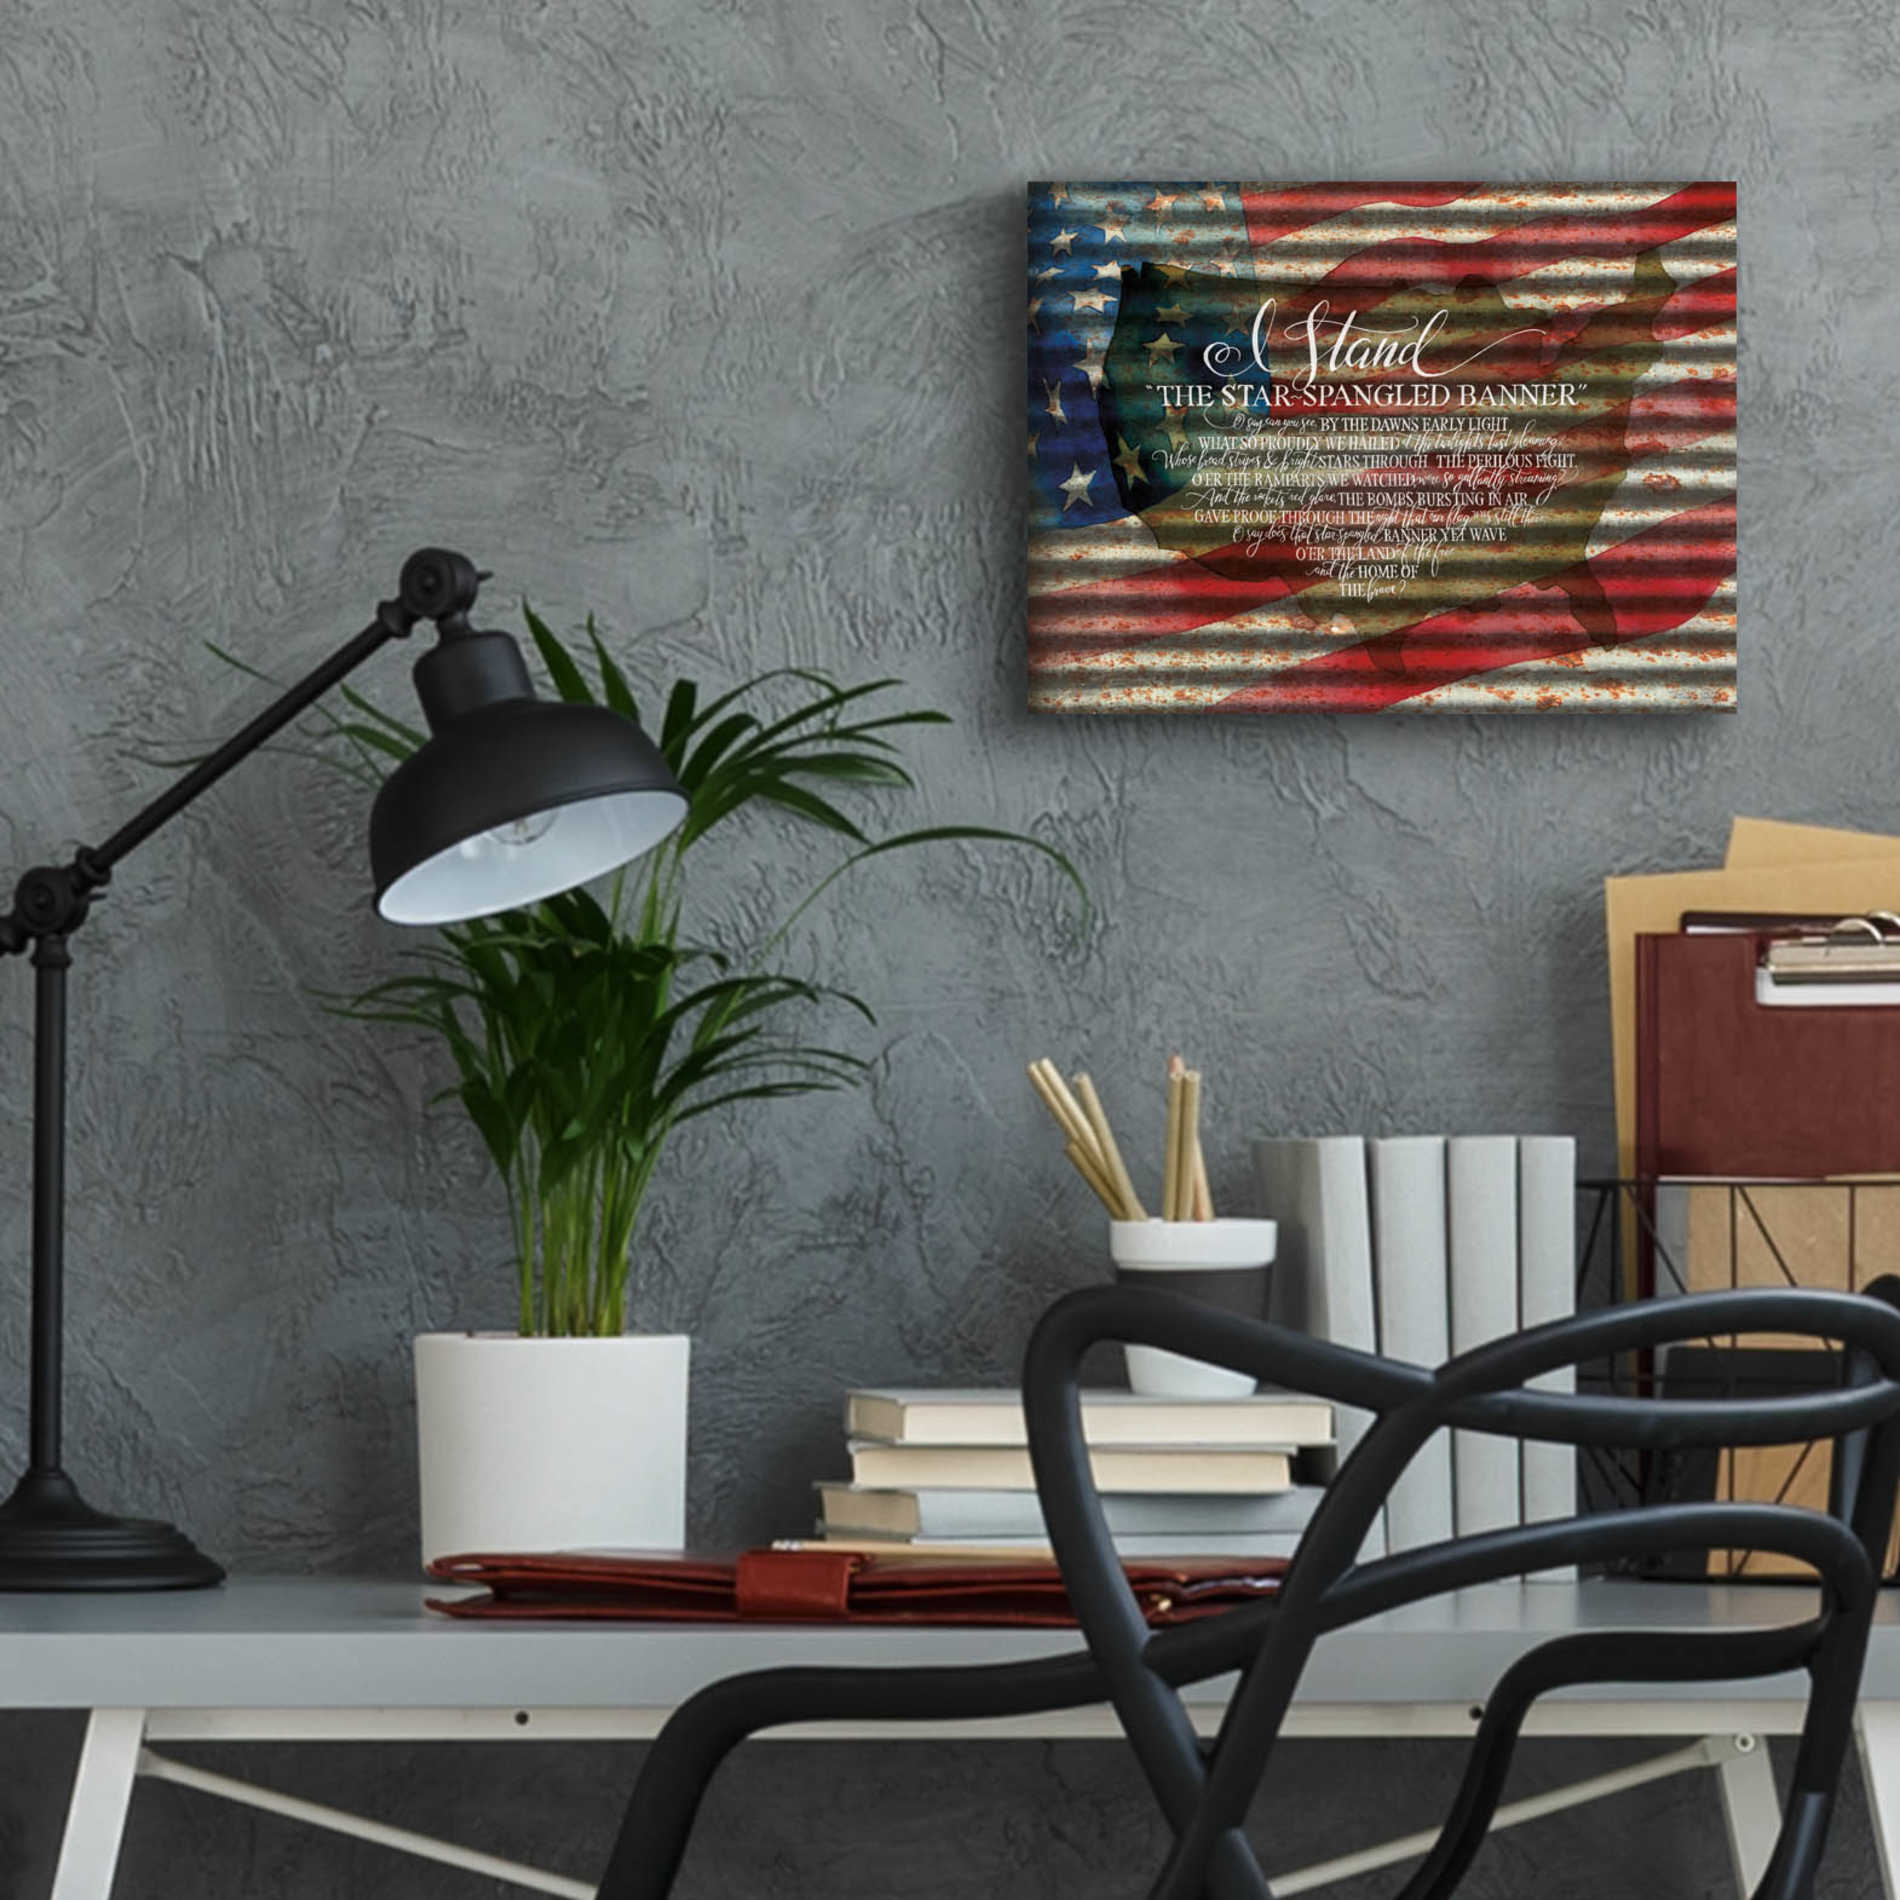 Epic Art 'I Stand American Flag on Metal' by Cindy Jacobs, Acrylic Glass Wall Art,16x12